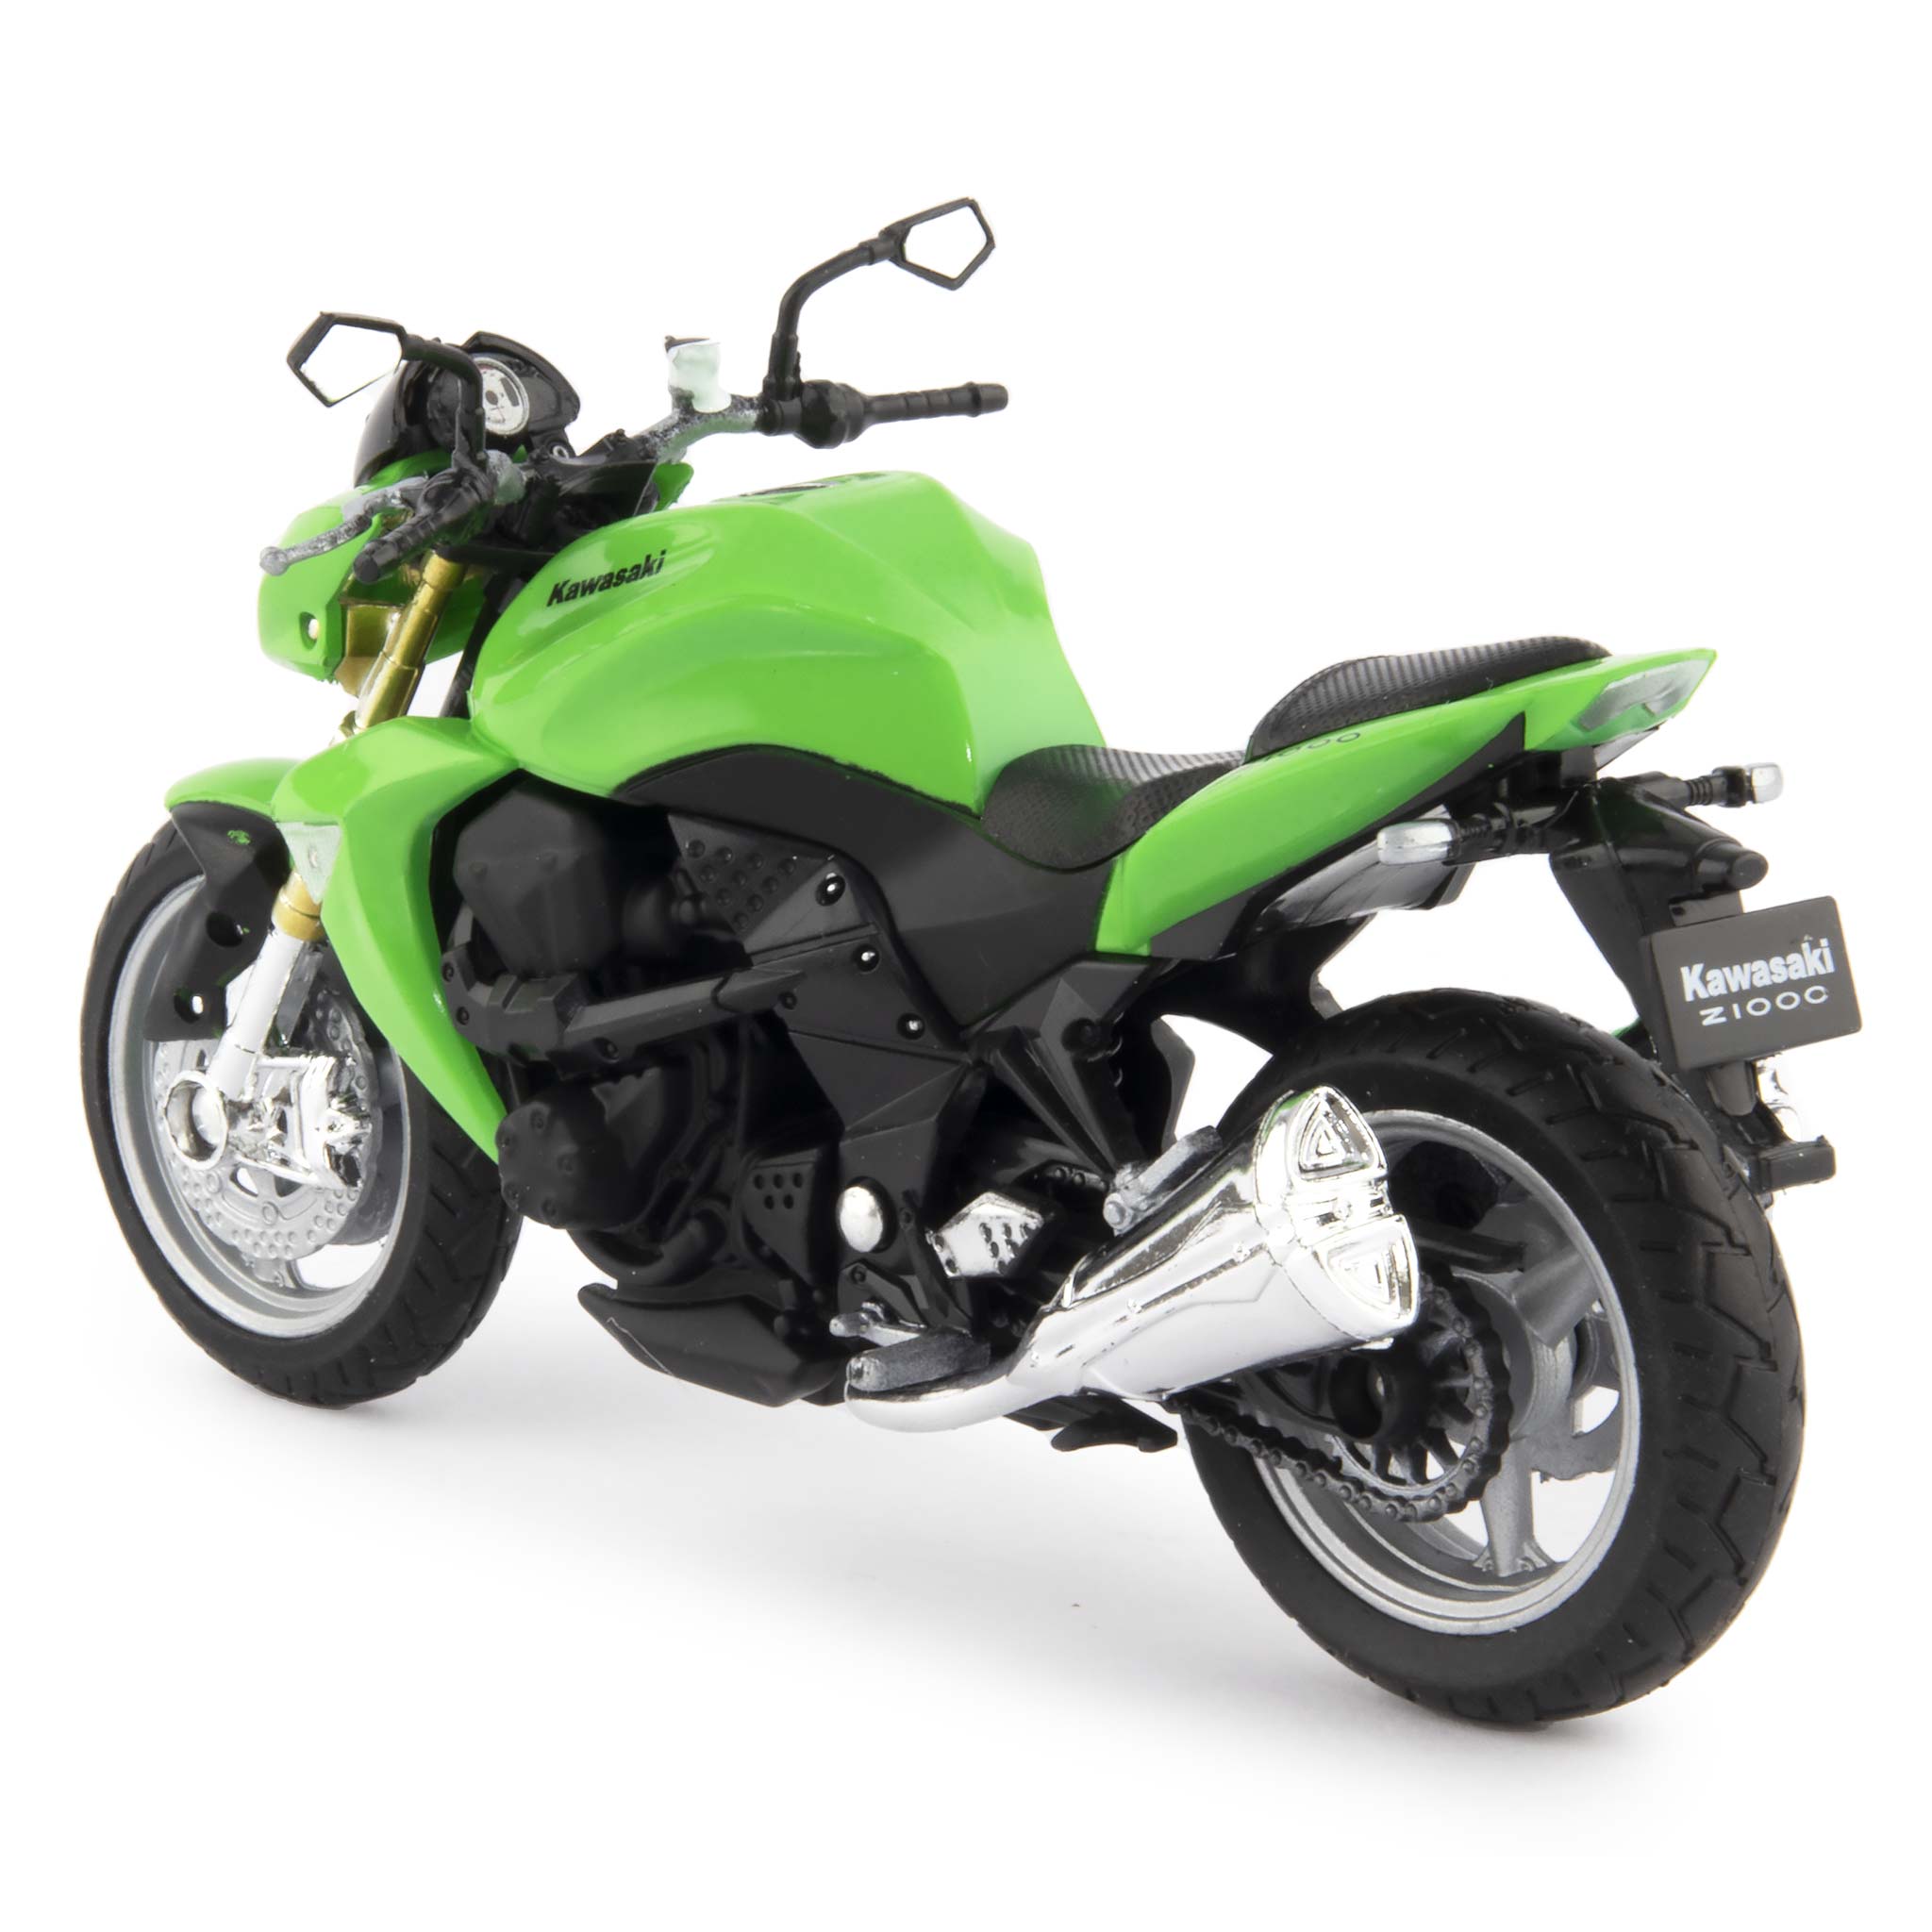 Kawasaki Z1000 Diecast Model Motorcycle 2007 green - 1:18 Scale-Welly-Diecast Model Centre